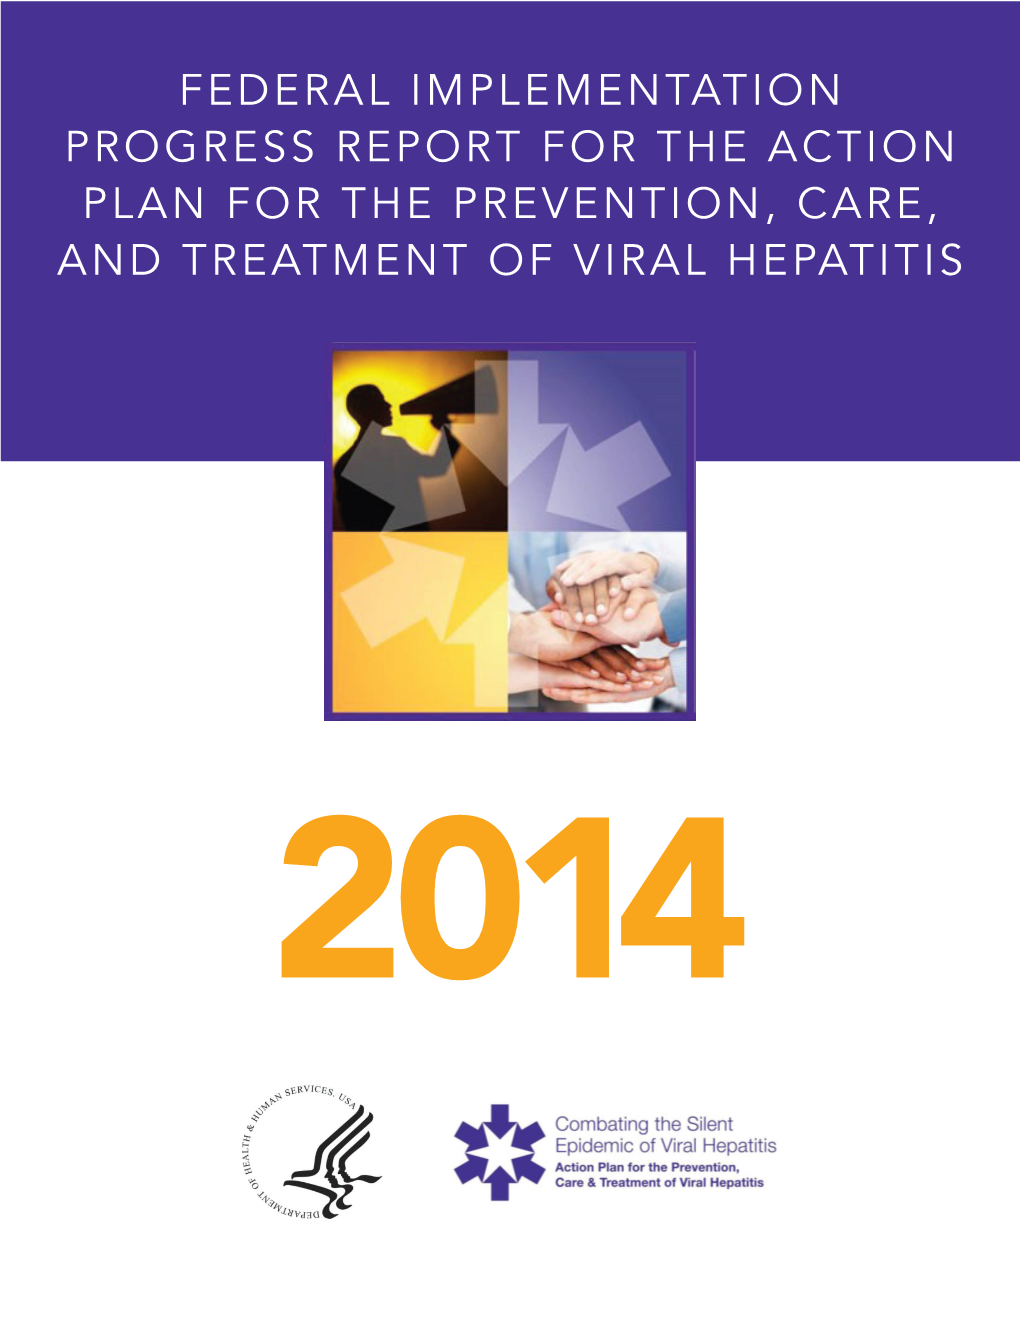 Federal Implementation Progress Report for the Action Plan for the Prevention, Care, and Treatment of Viral Hepatitis [2014]